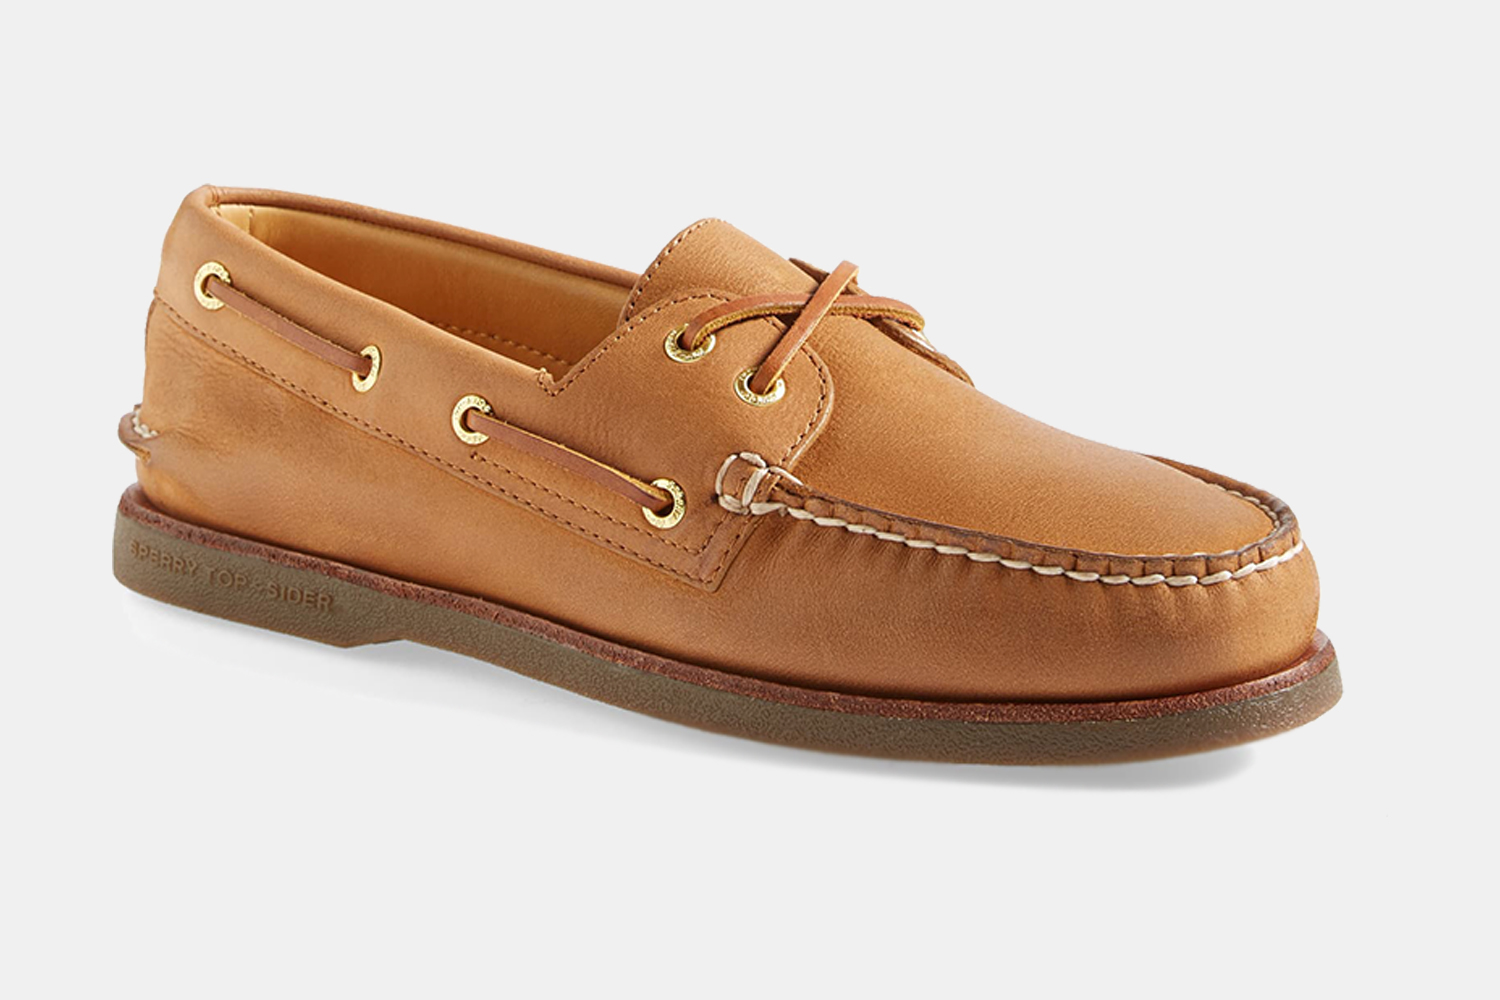 Sperry Gold Cup Boat Shoes